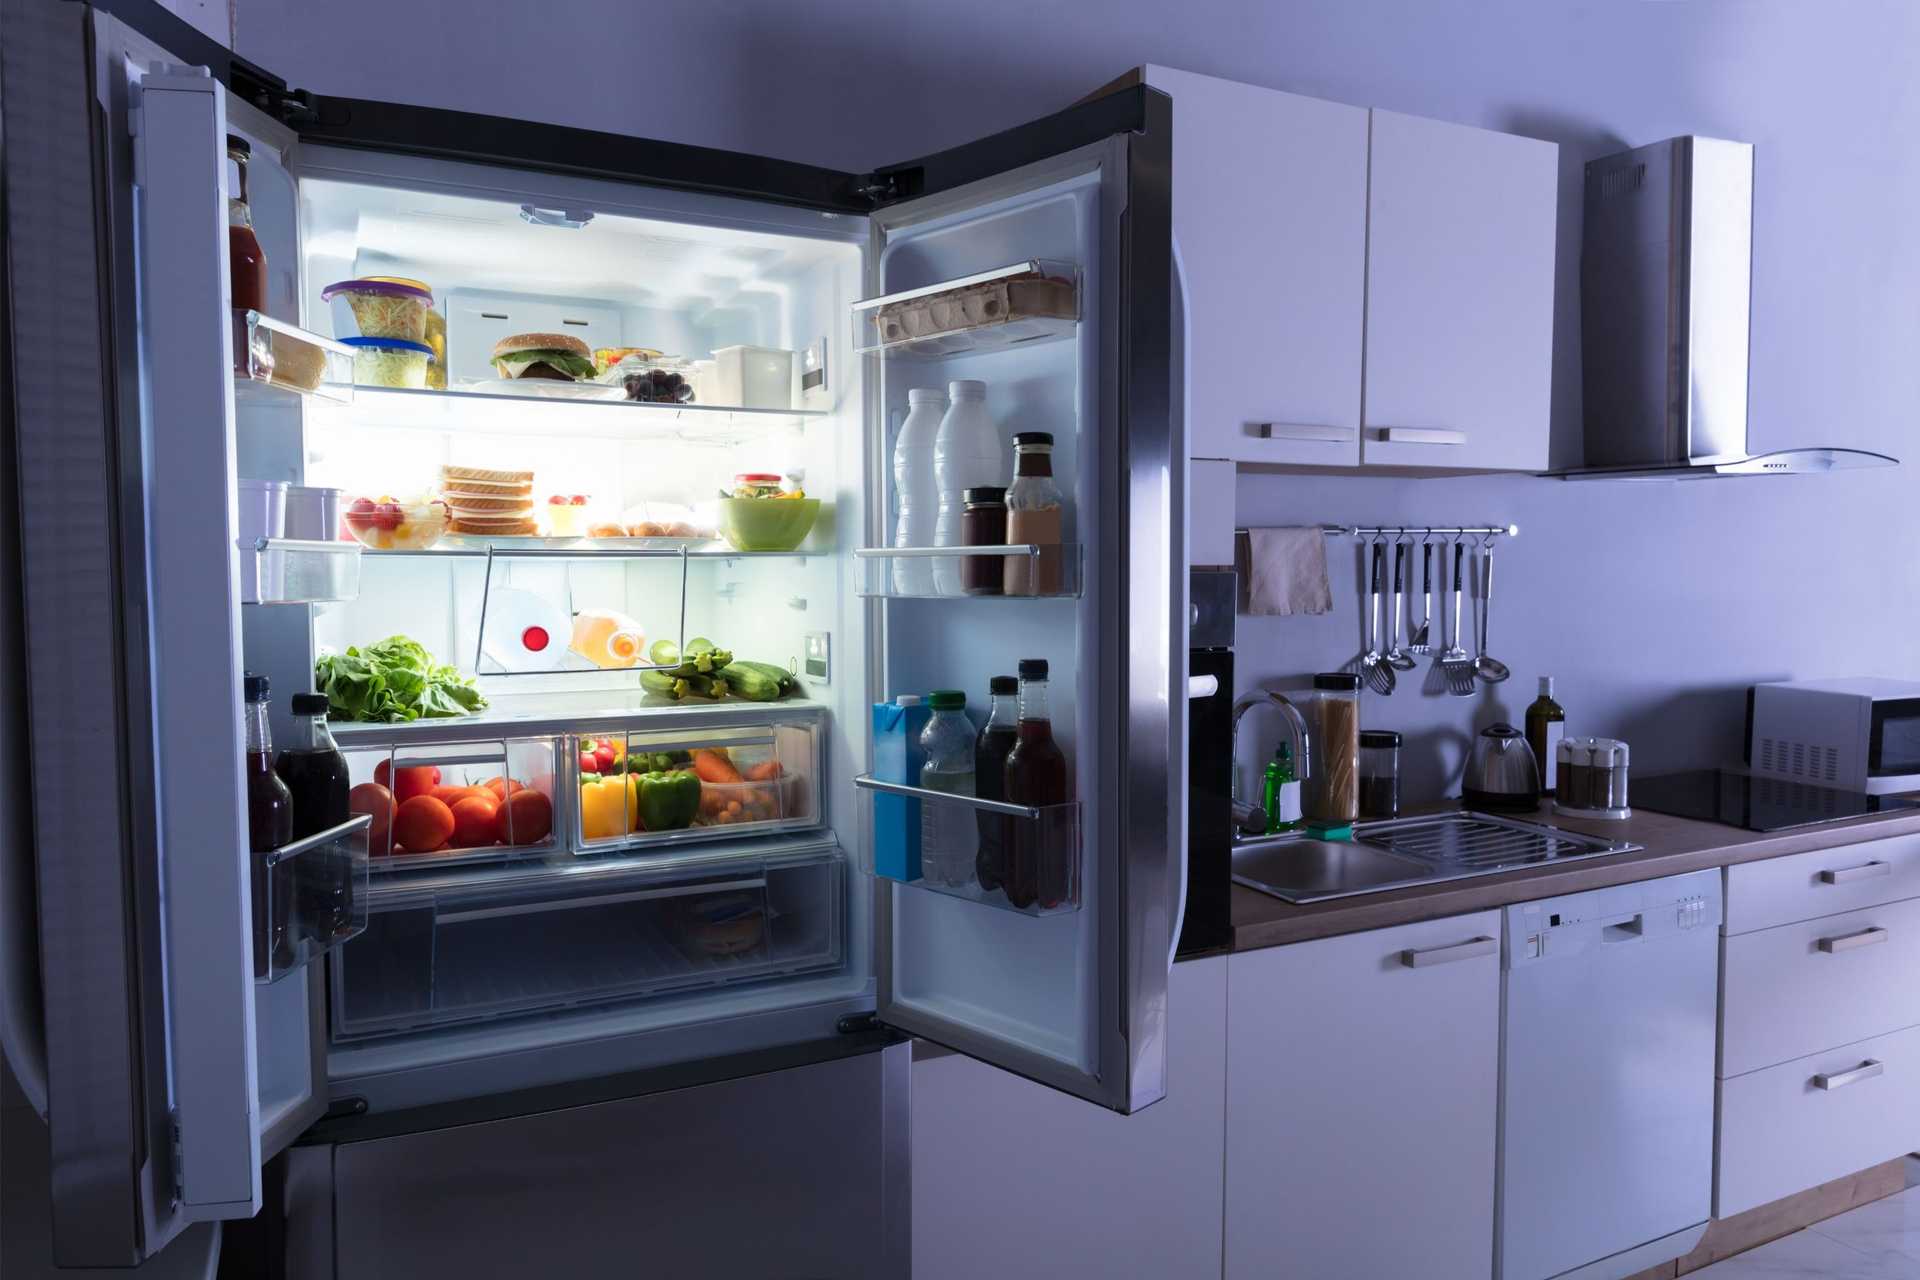 Best time to buy refrigerators